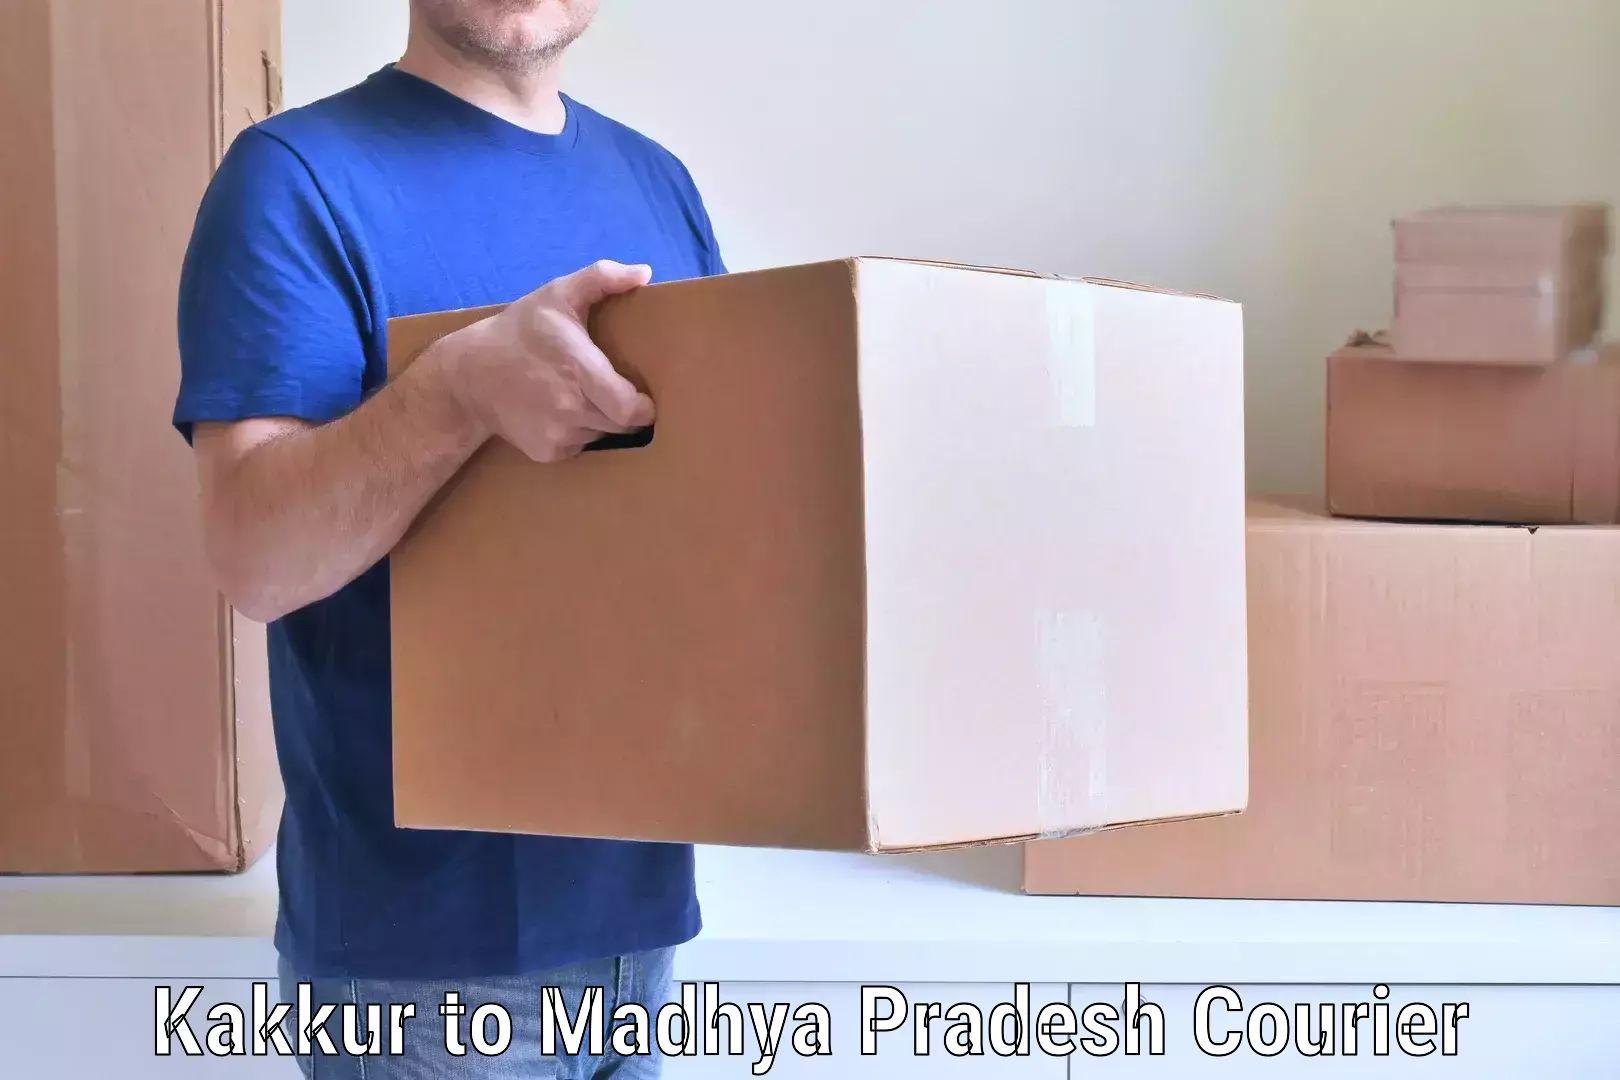 Professional movers Kakkur to Indore